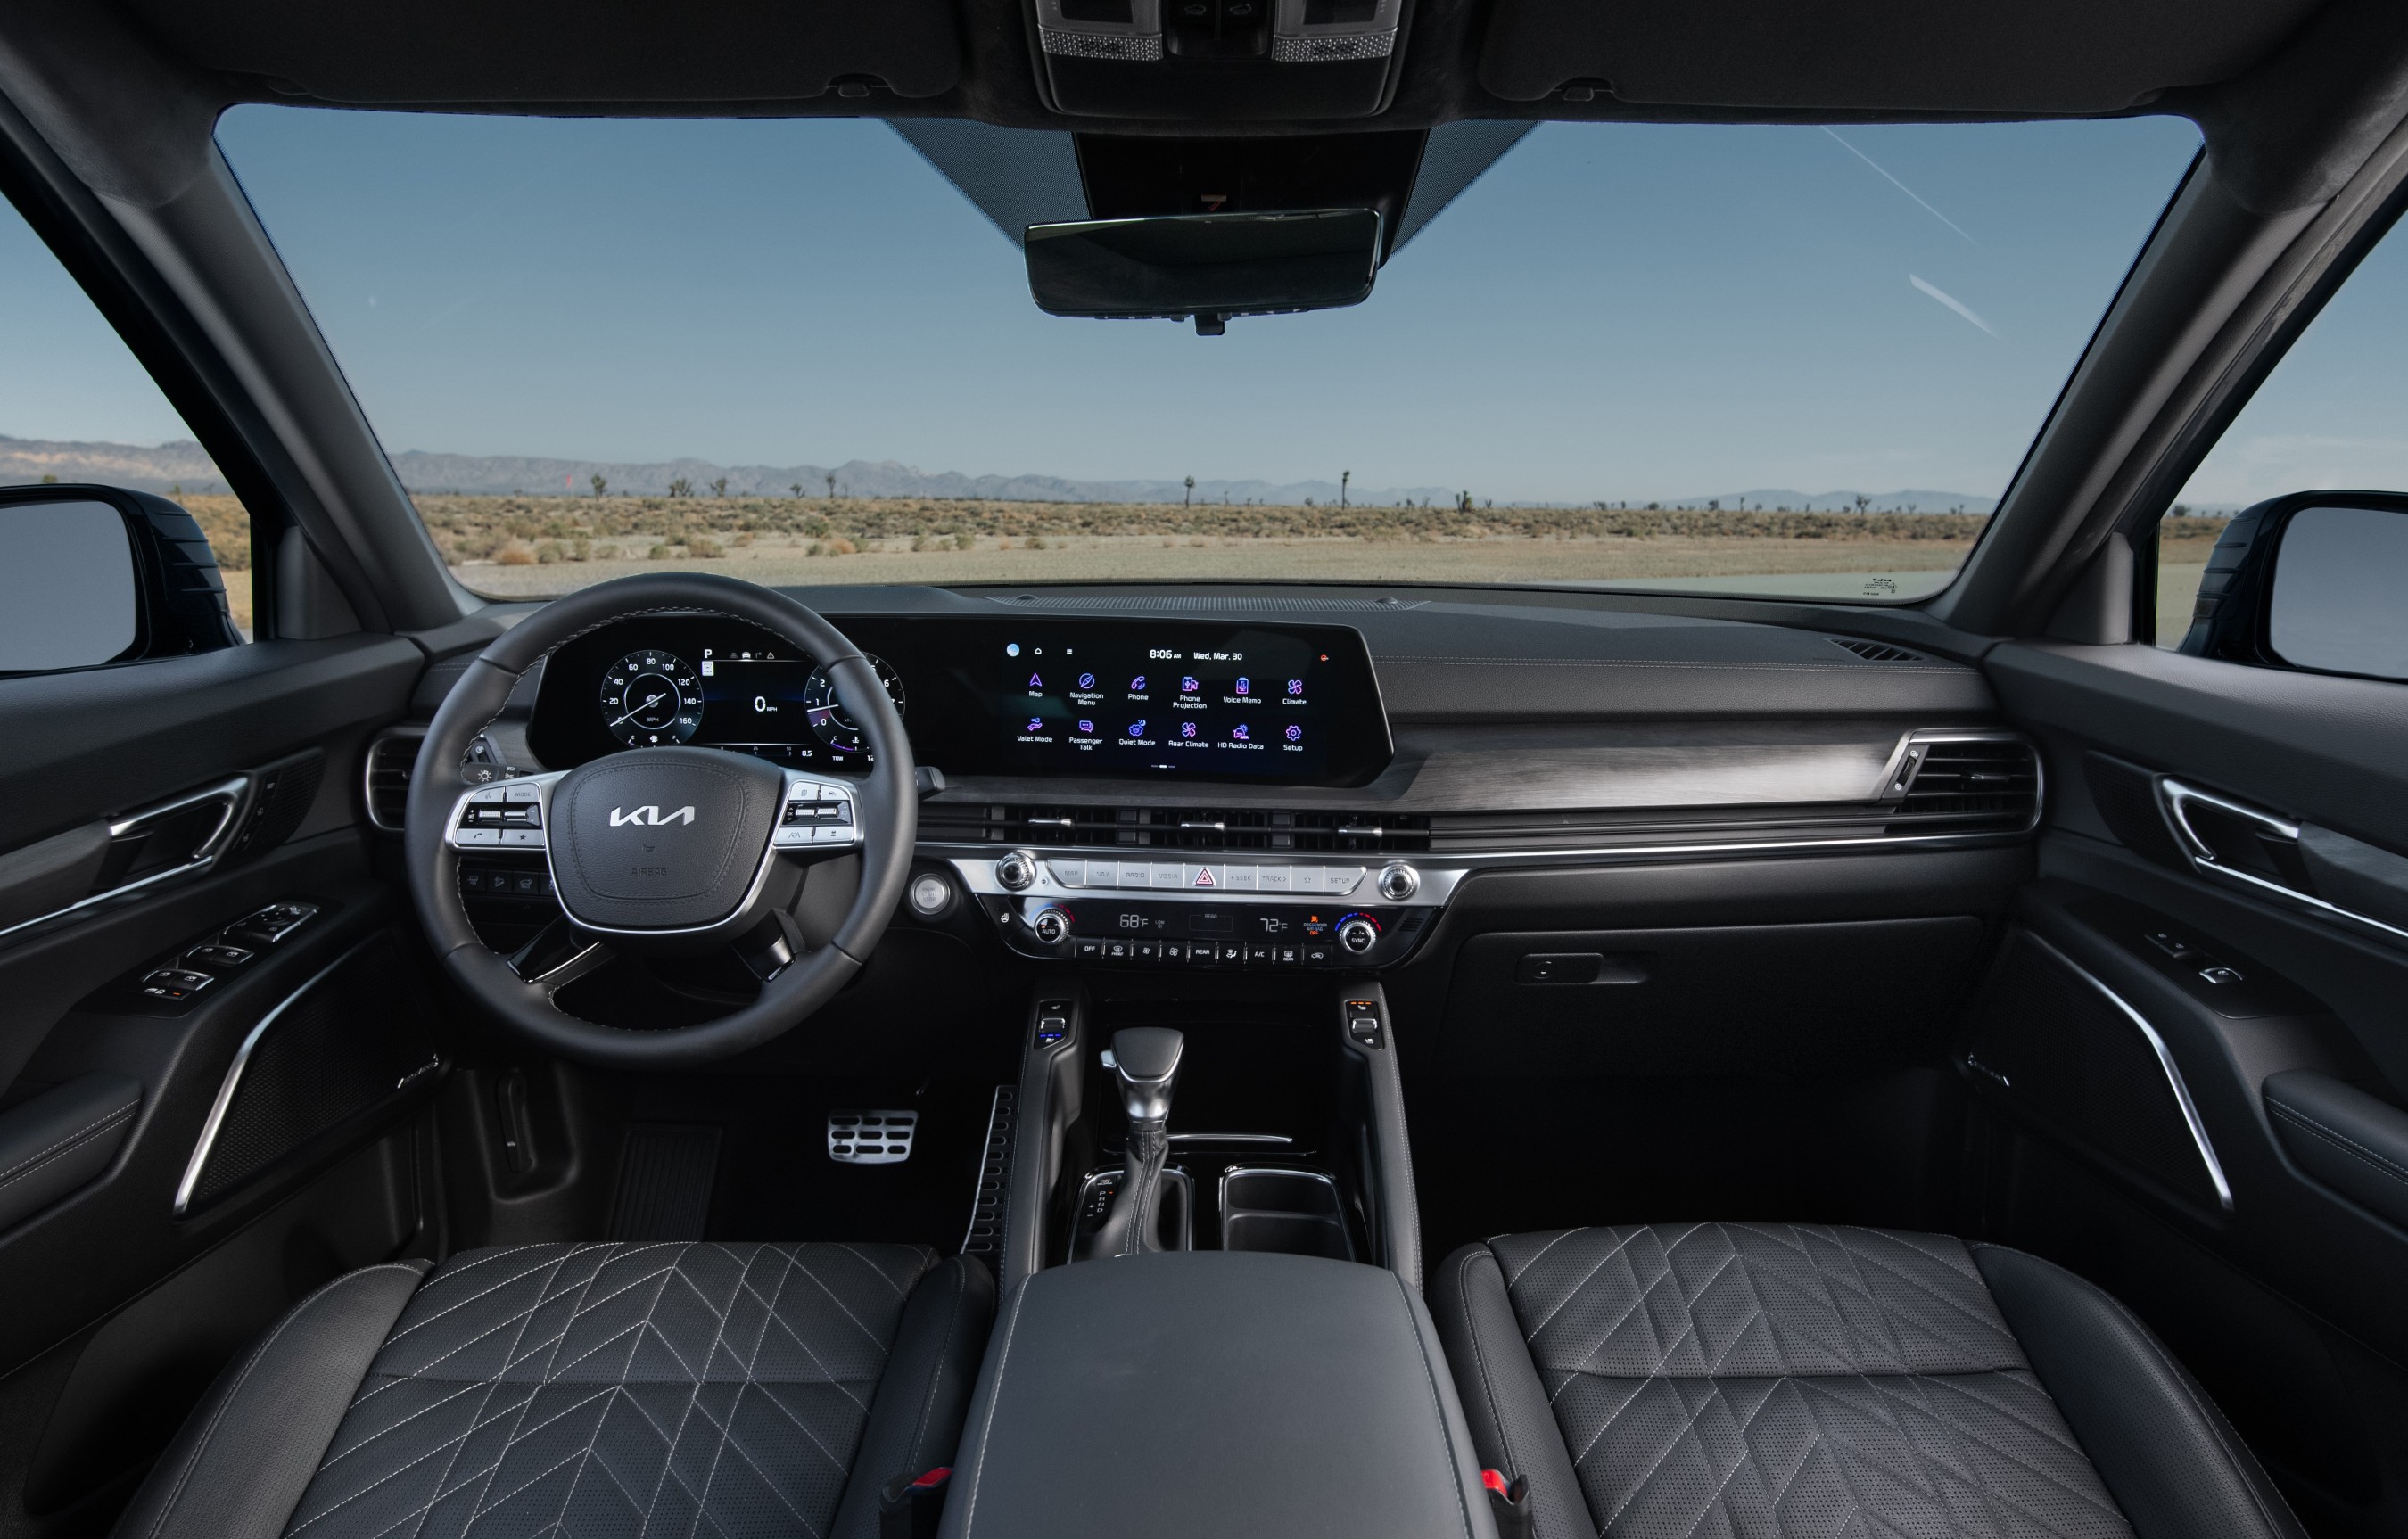 The new 2023 Kia Telluride features a redesigned dash with available dual curved panoramic 12.3-inch display screens.